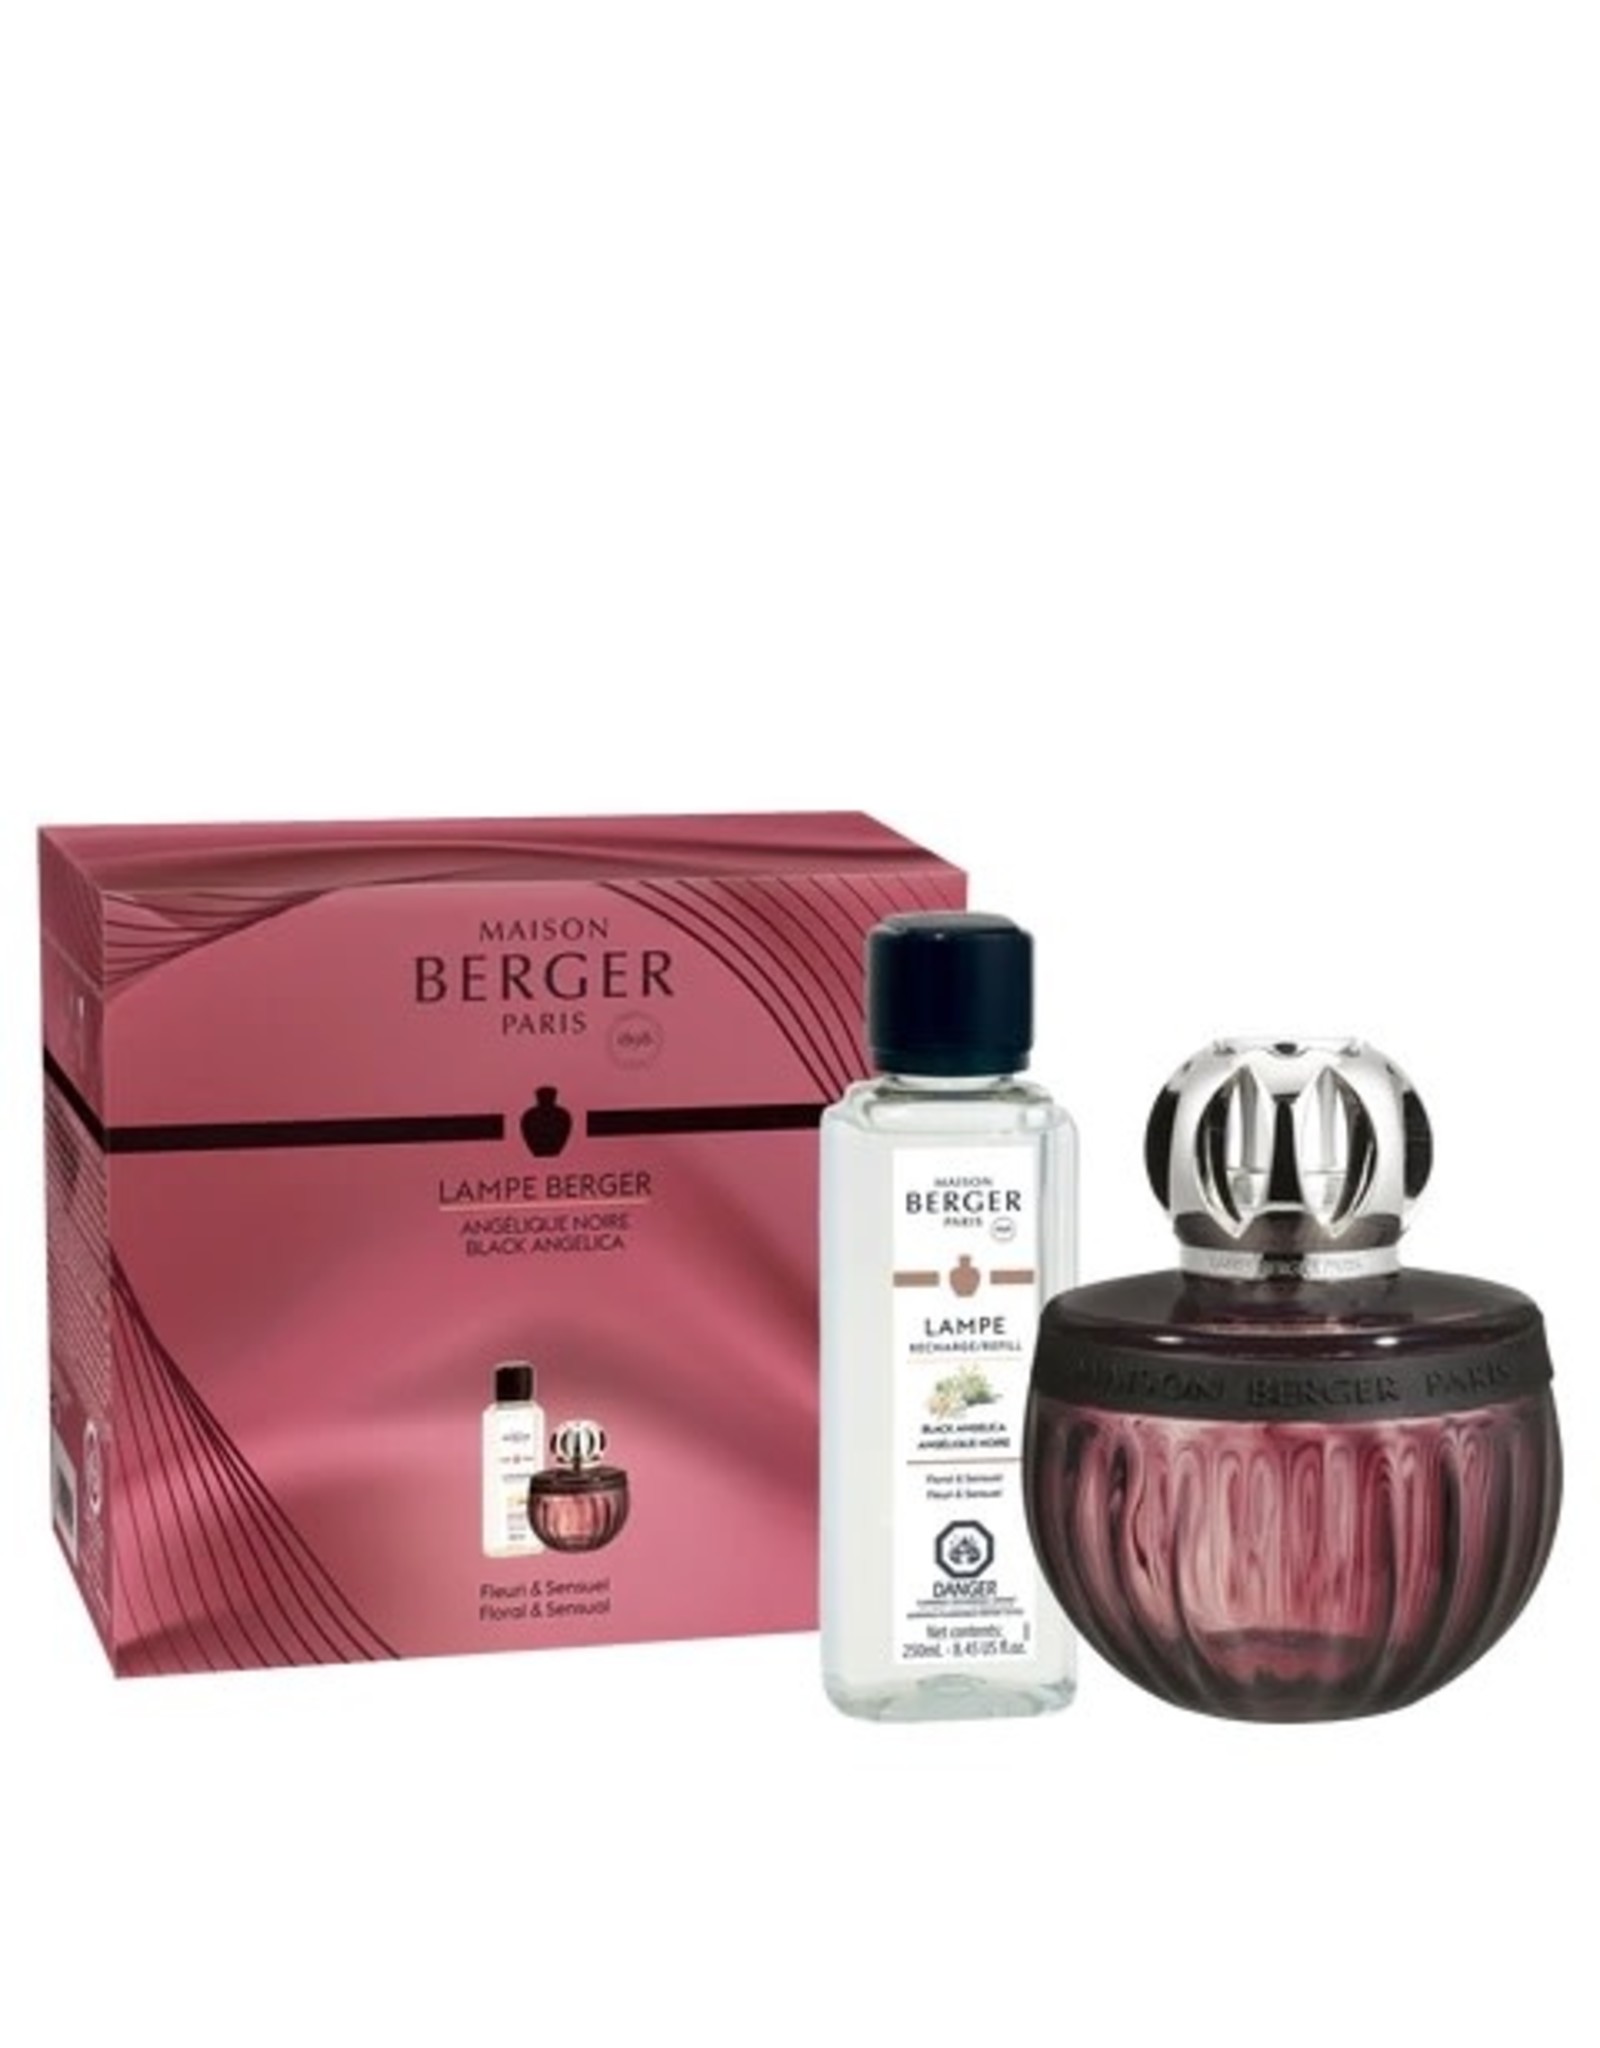 Maison Berger Duality Lamp Gift Set with Black Angelica